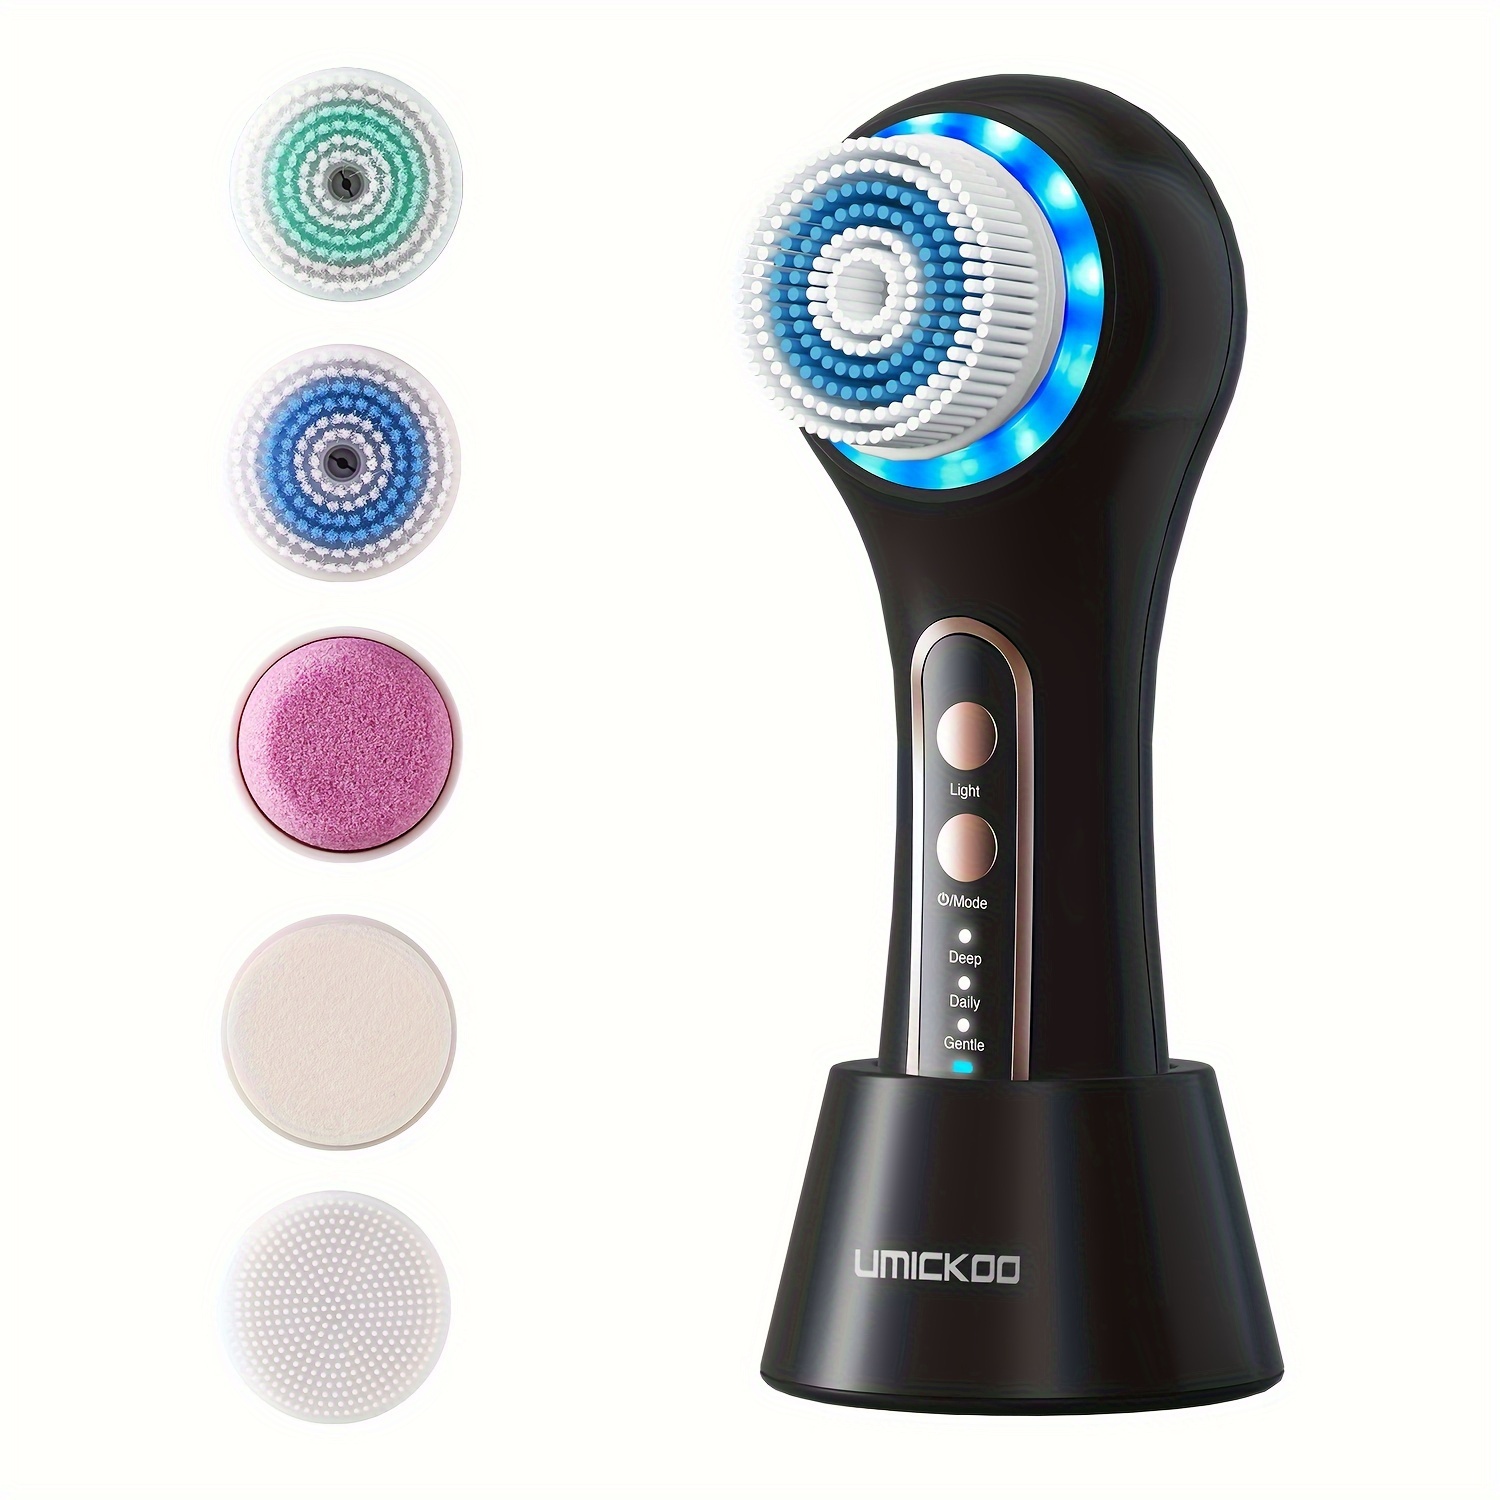 

Face Scrubber Exfoliator, Facial Cleansing Brush Rechargeable Ipx7 Waterproof With 5 Brush Heads, Face Spin Brush For Exfoliating, Massaging And Deep Cleansing, Mother's Day Gift